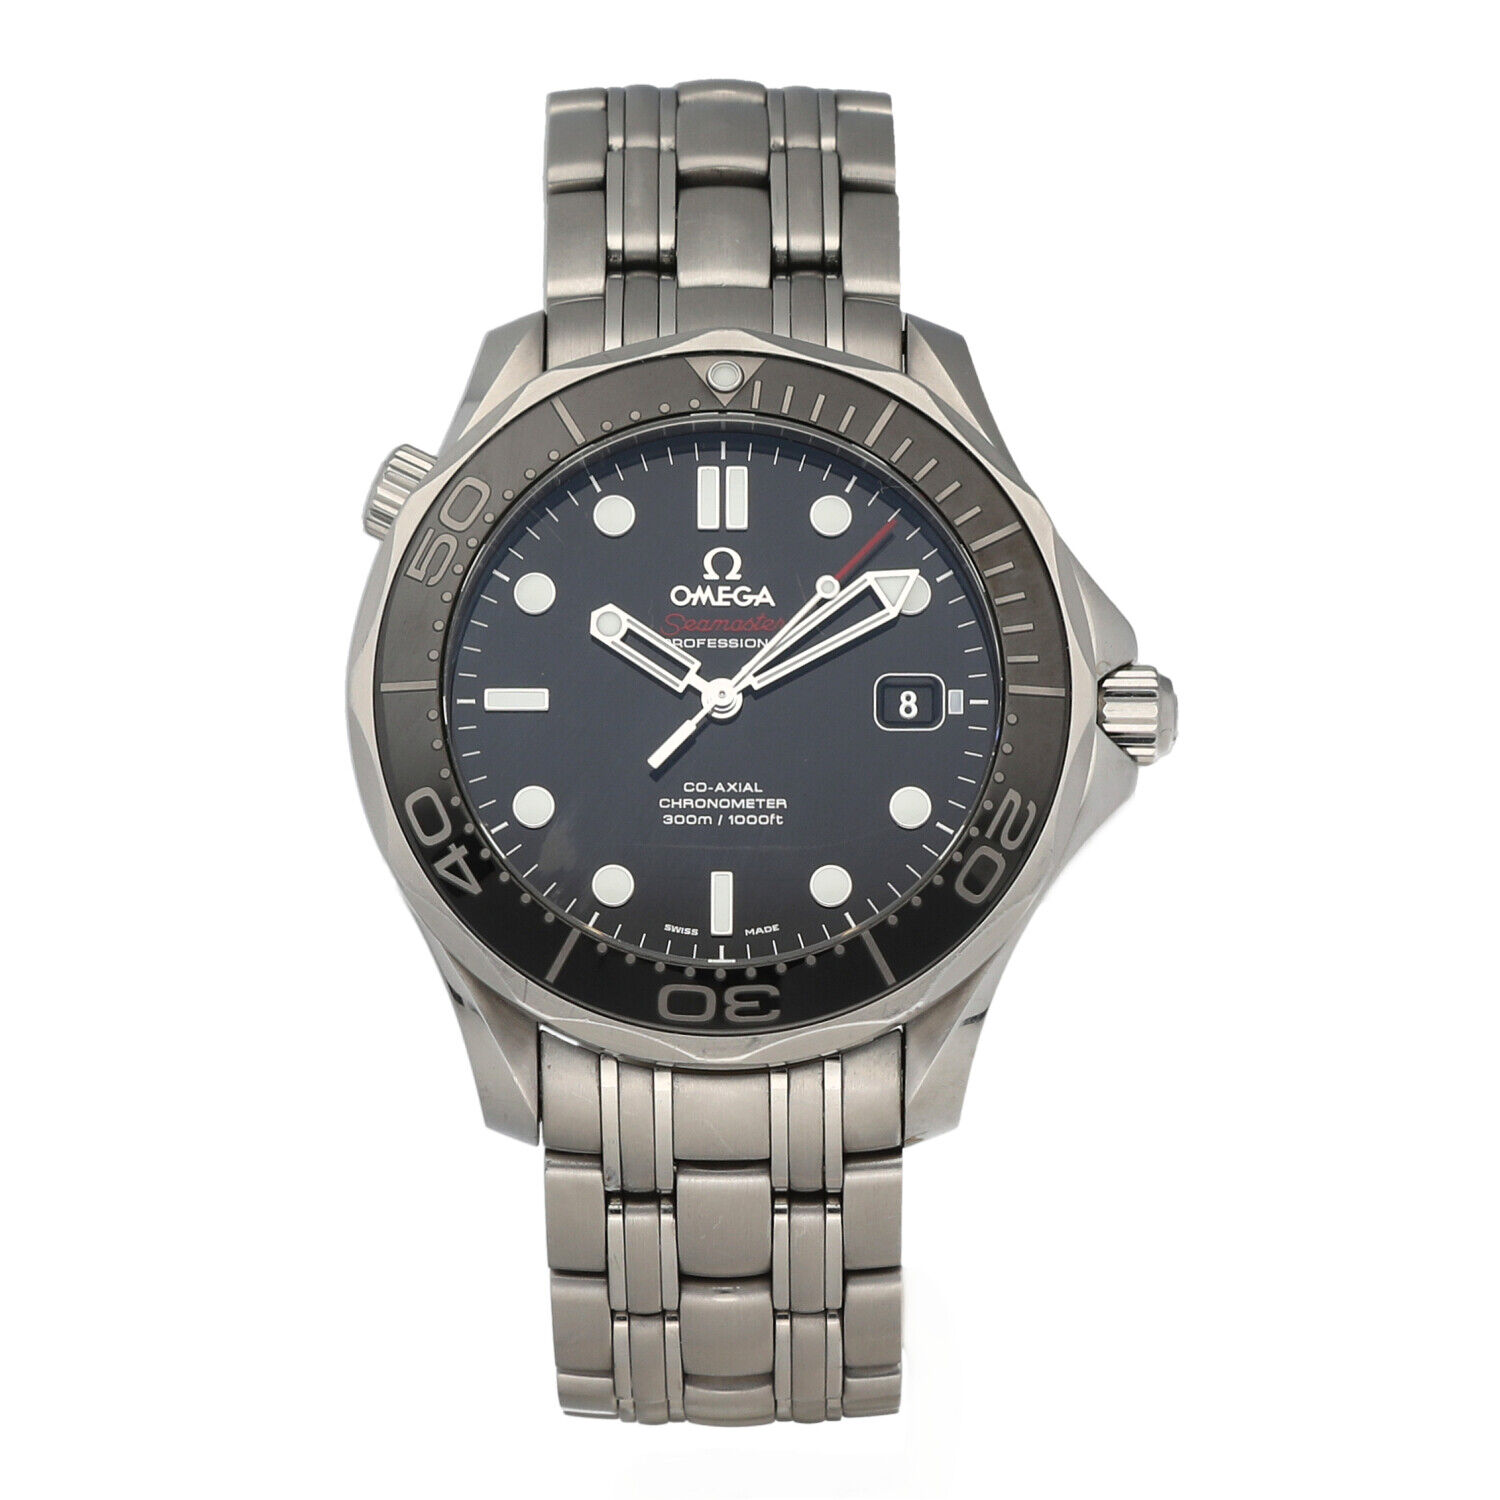 Omega-Seamaster-Co-Axial-Diver-300M-Ceramic-Black-Dial-41mm-Steel-Wrist-Watch-134179321330